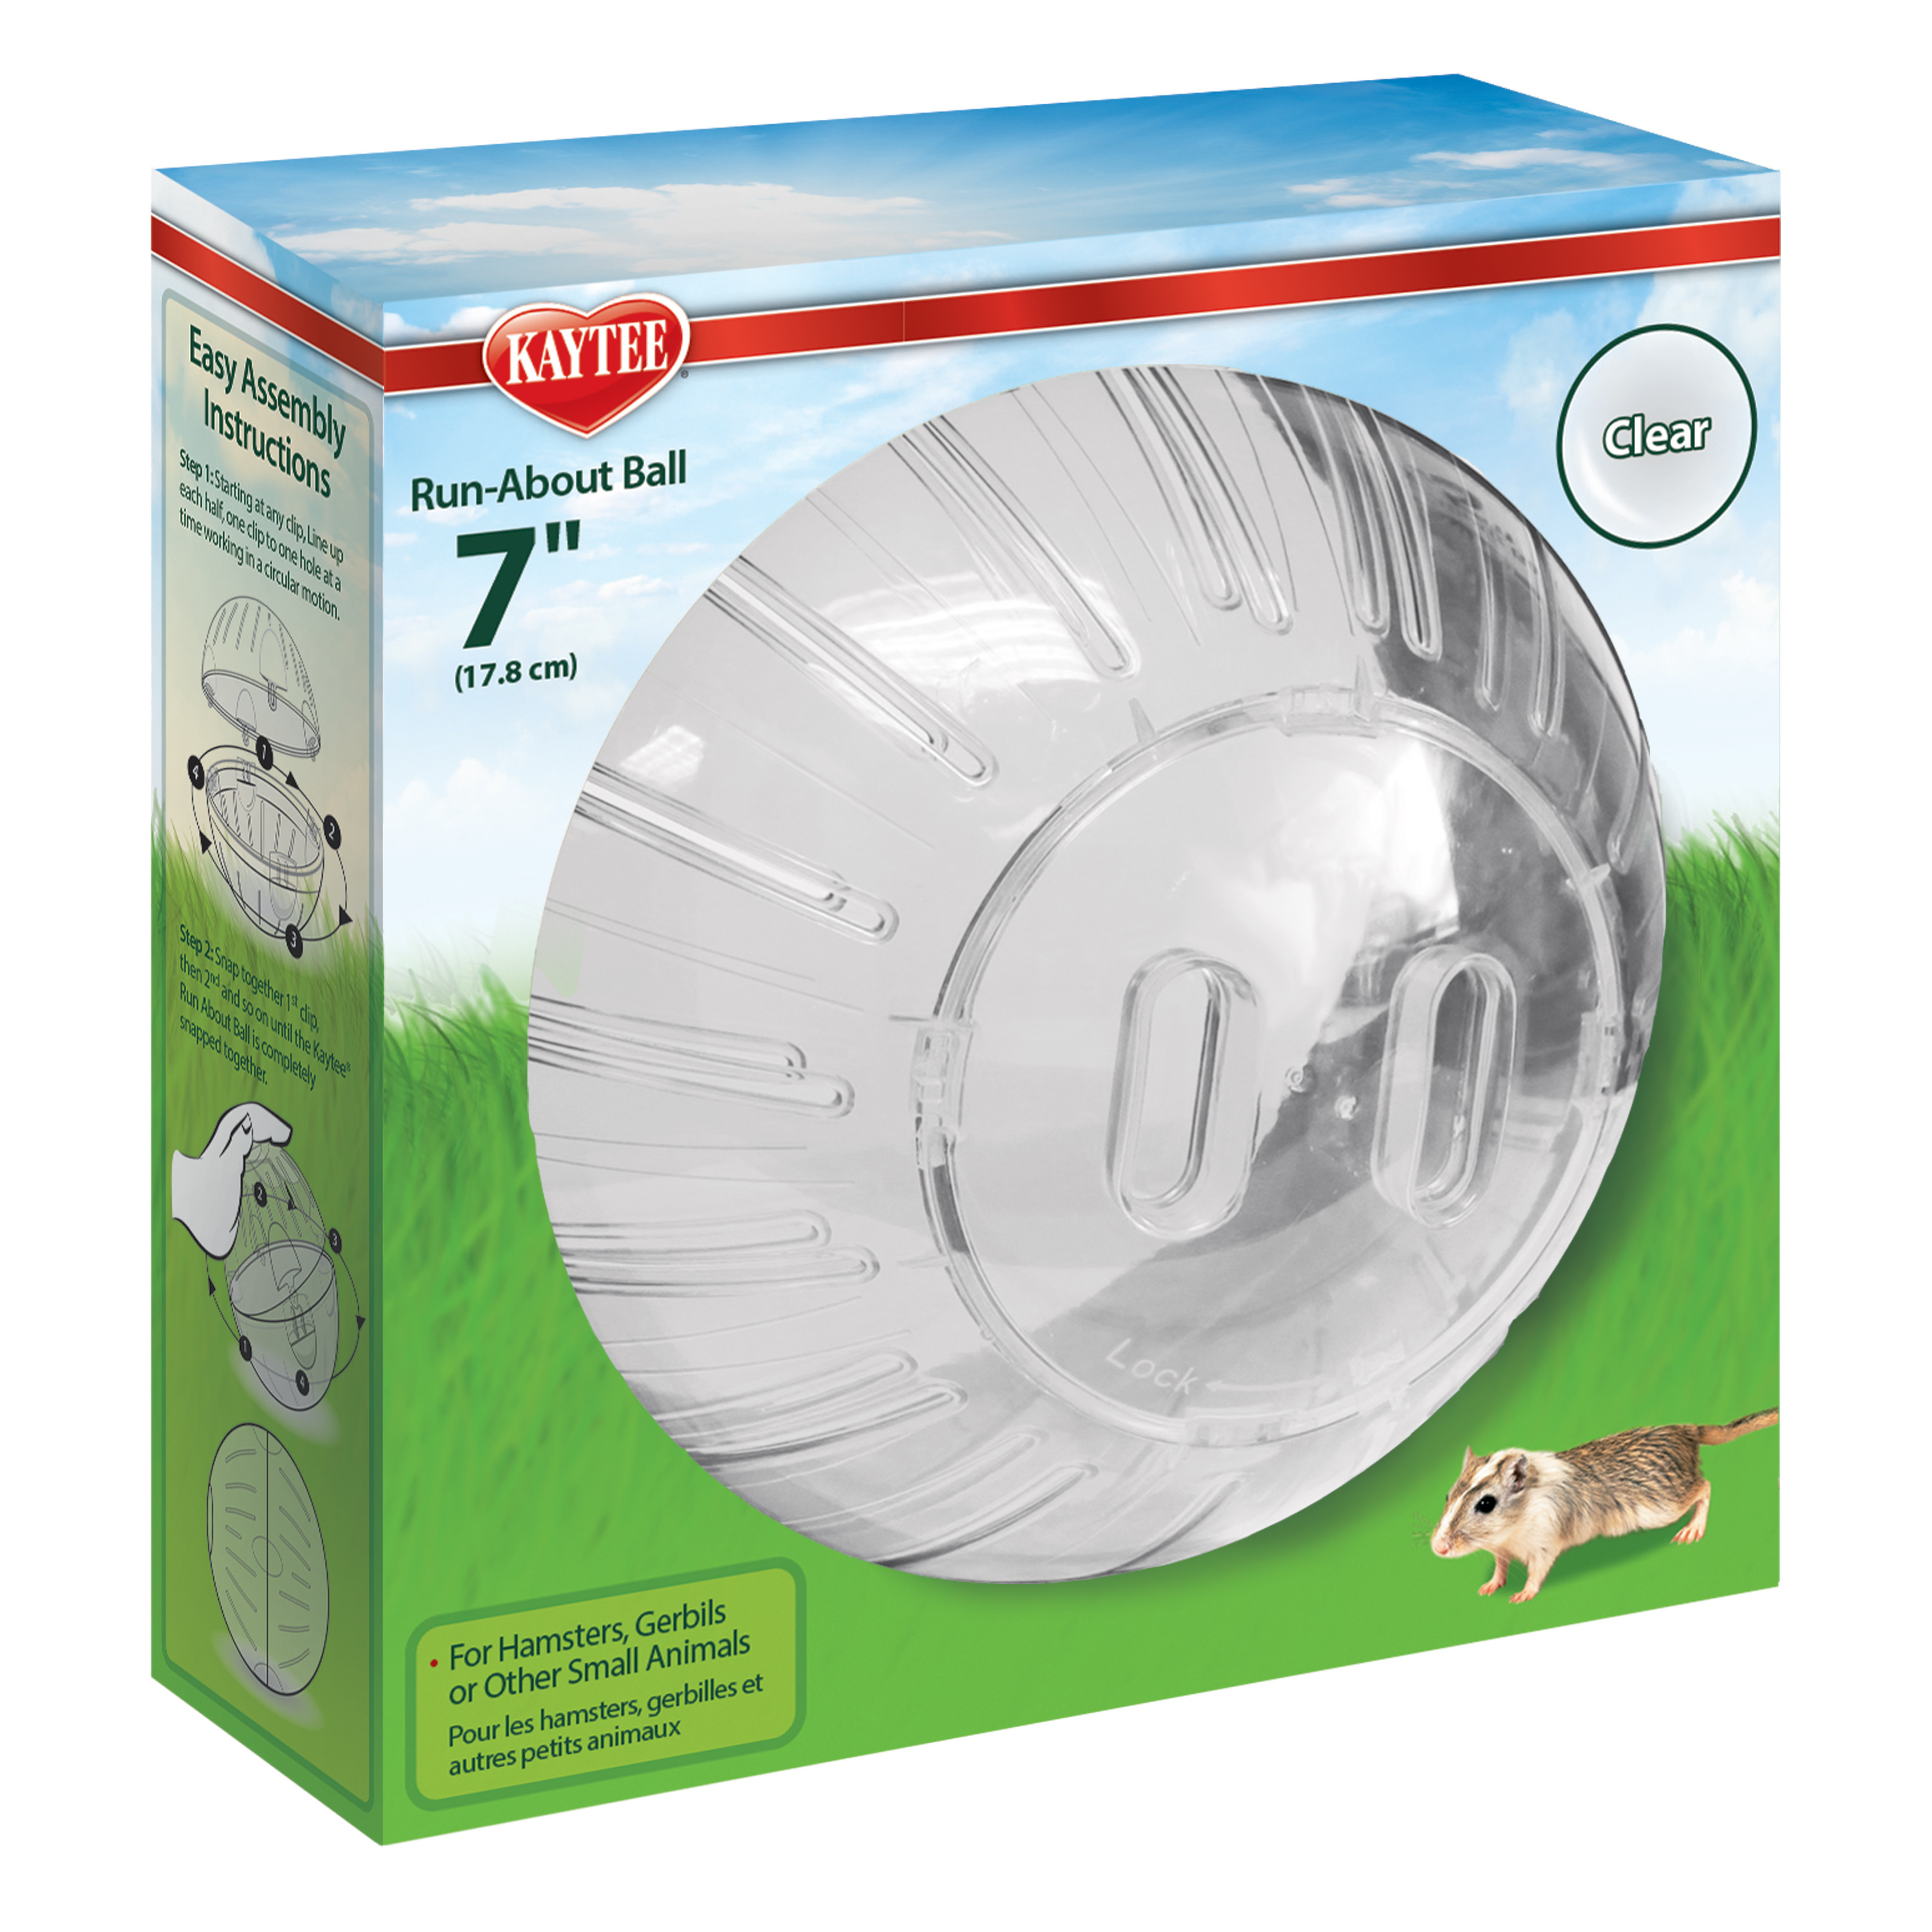 Kaytee Run-About Ball for Hamsters, Gerbils and Other Small Animals, Clear 7 Inches - image 1 of 11